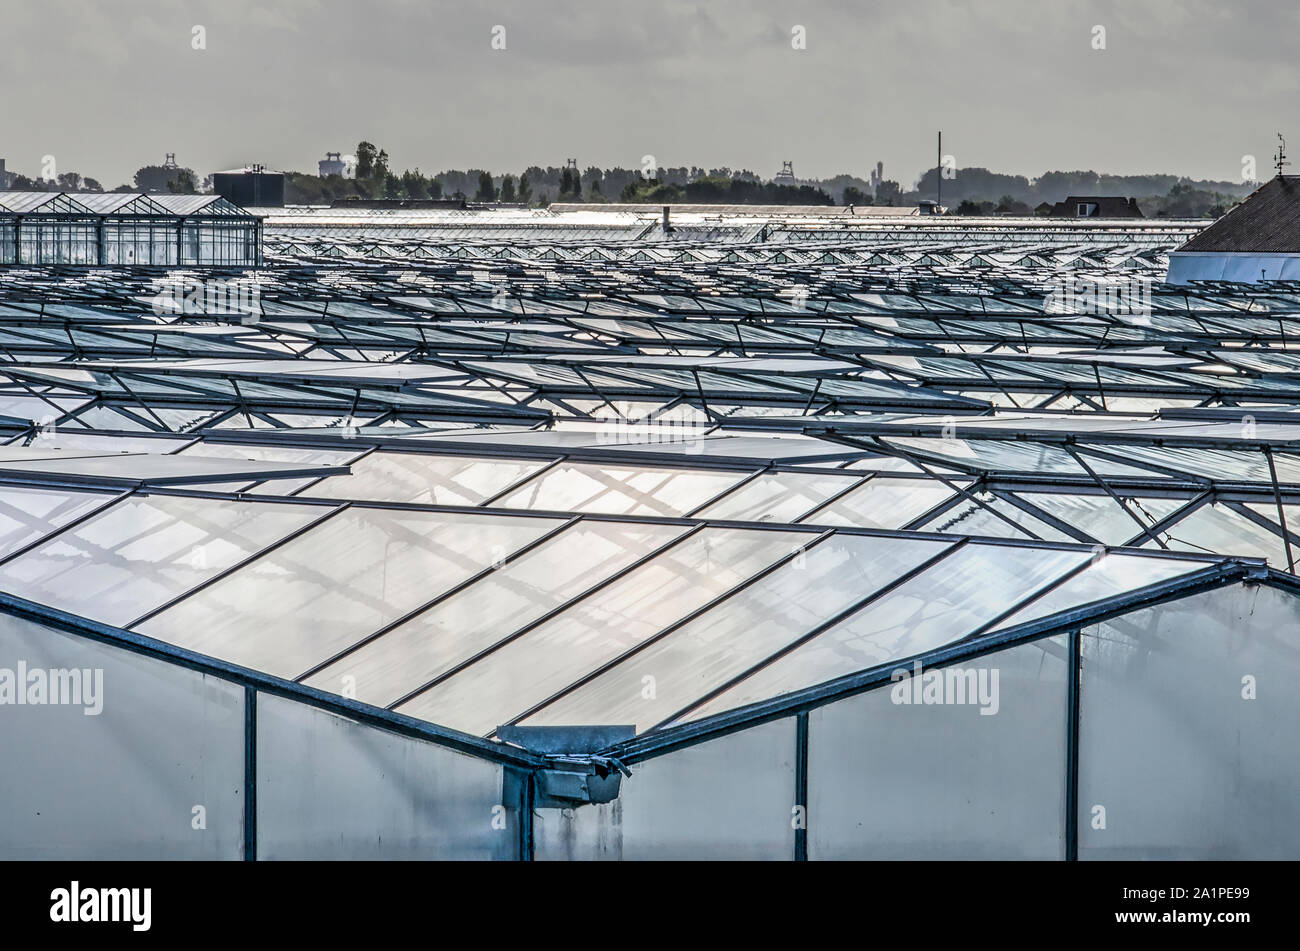 's-Gravenzande, The Netherlands, September 28, 2019: view across a sea of glass panels in the Westland, the main area of greenhouse horticulte in the Stock Photo